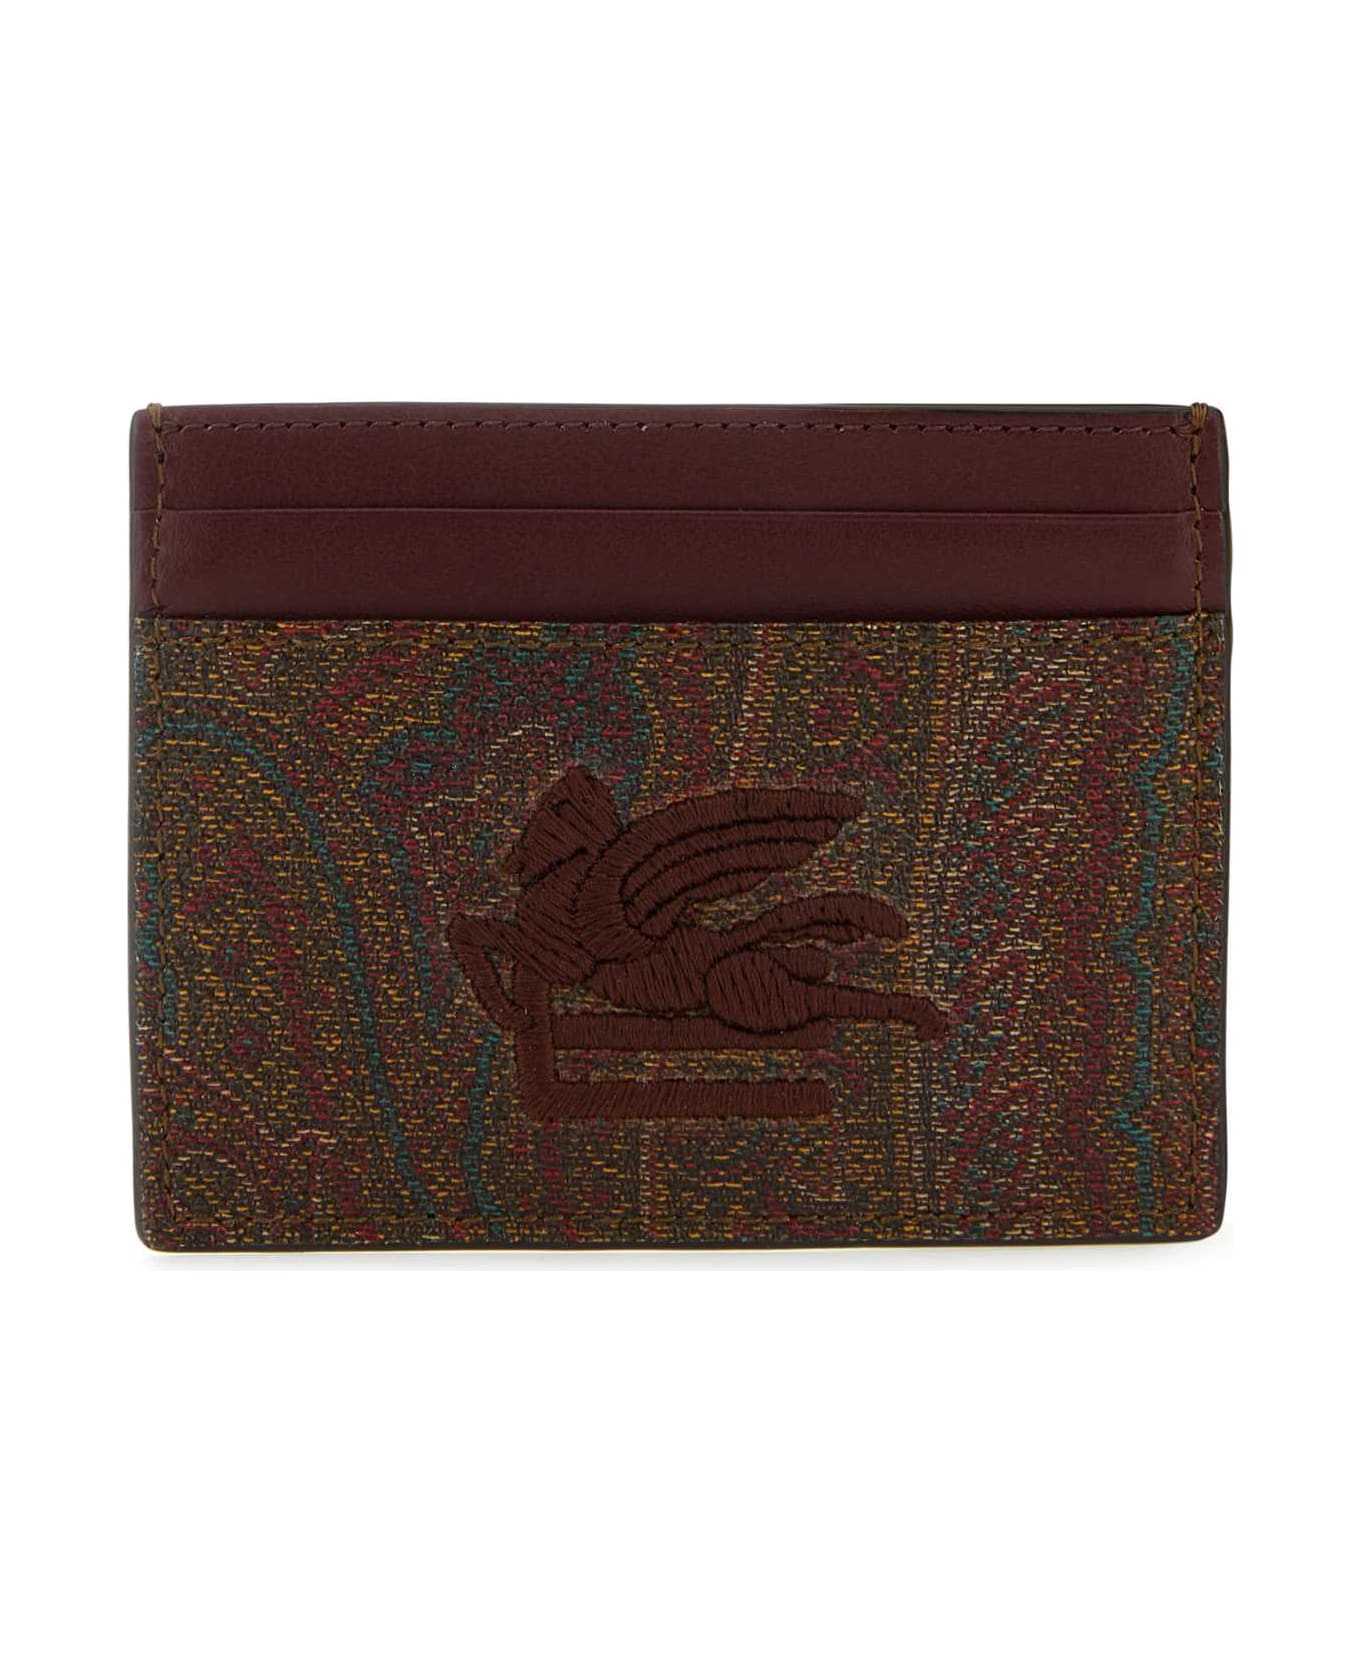 Etro Multicolor Canvas And Leather Card Holder - 600 財布